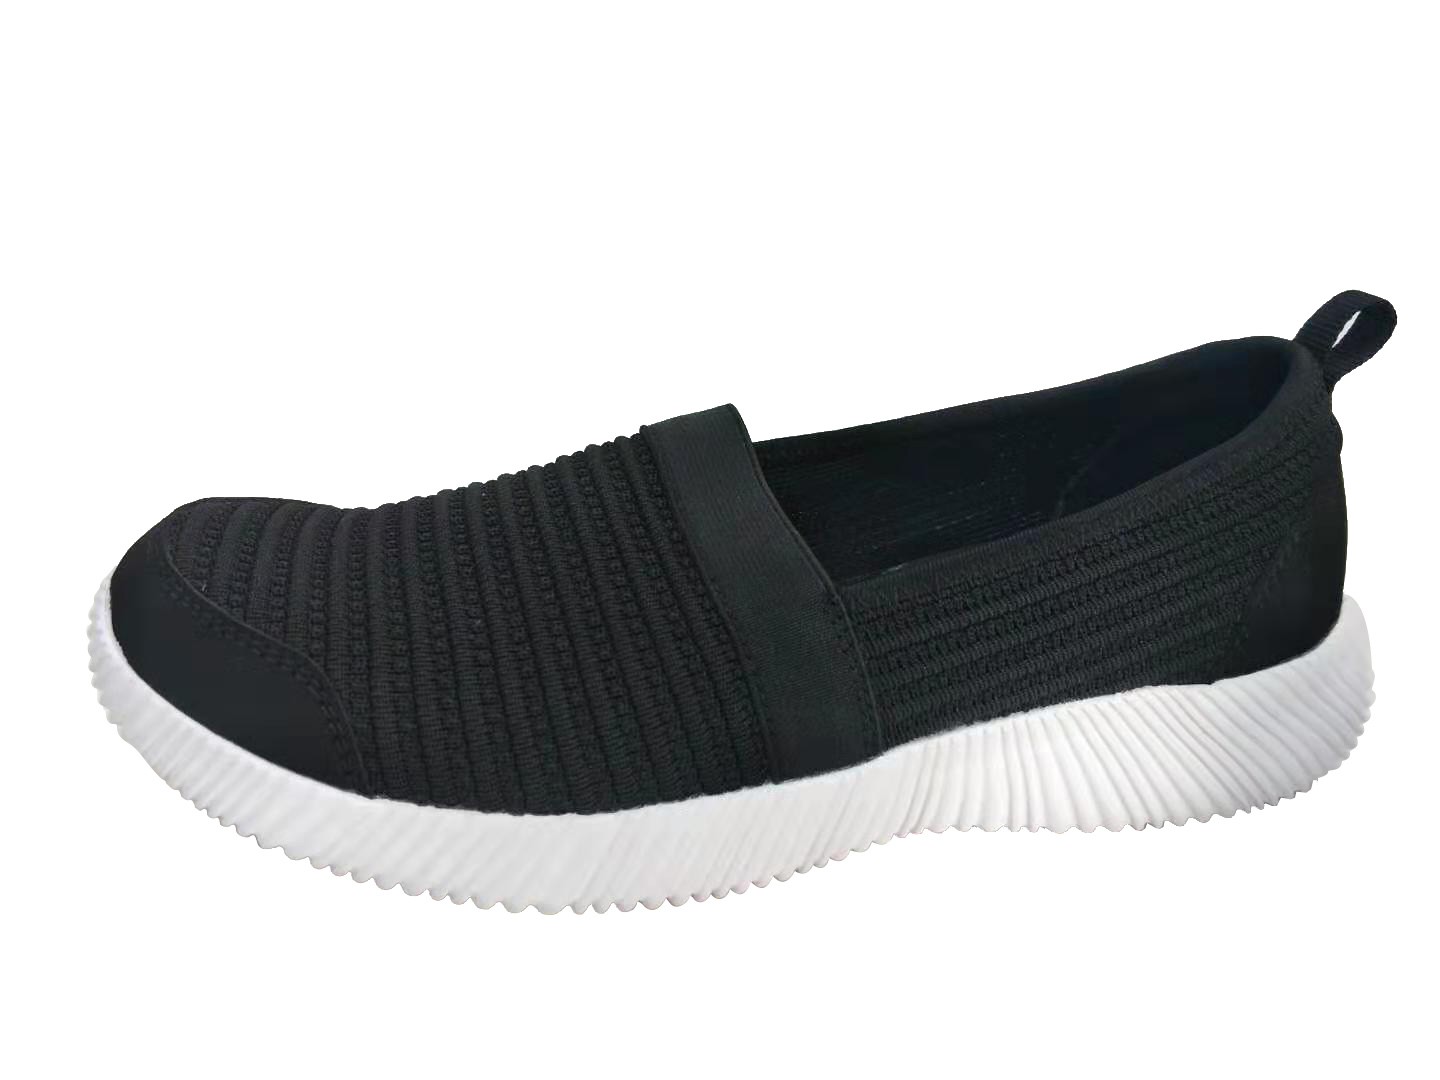 New Model Flat Casual Shoes Ladies Slip-On Sneakers Women Casual Shoes Manufacturers, New Model Flat Casual Shoes Ladies Slip-On Sneakers Women Casual Shoes Factory, Supply New Model Flat Casual Shoes Ladies Slip-On Sneakers Women Casual Shoes